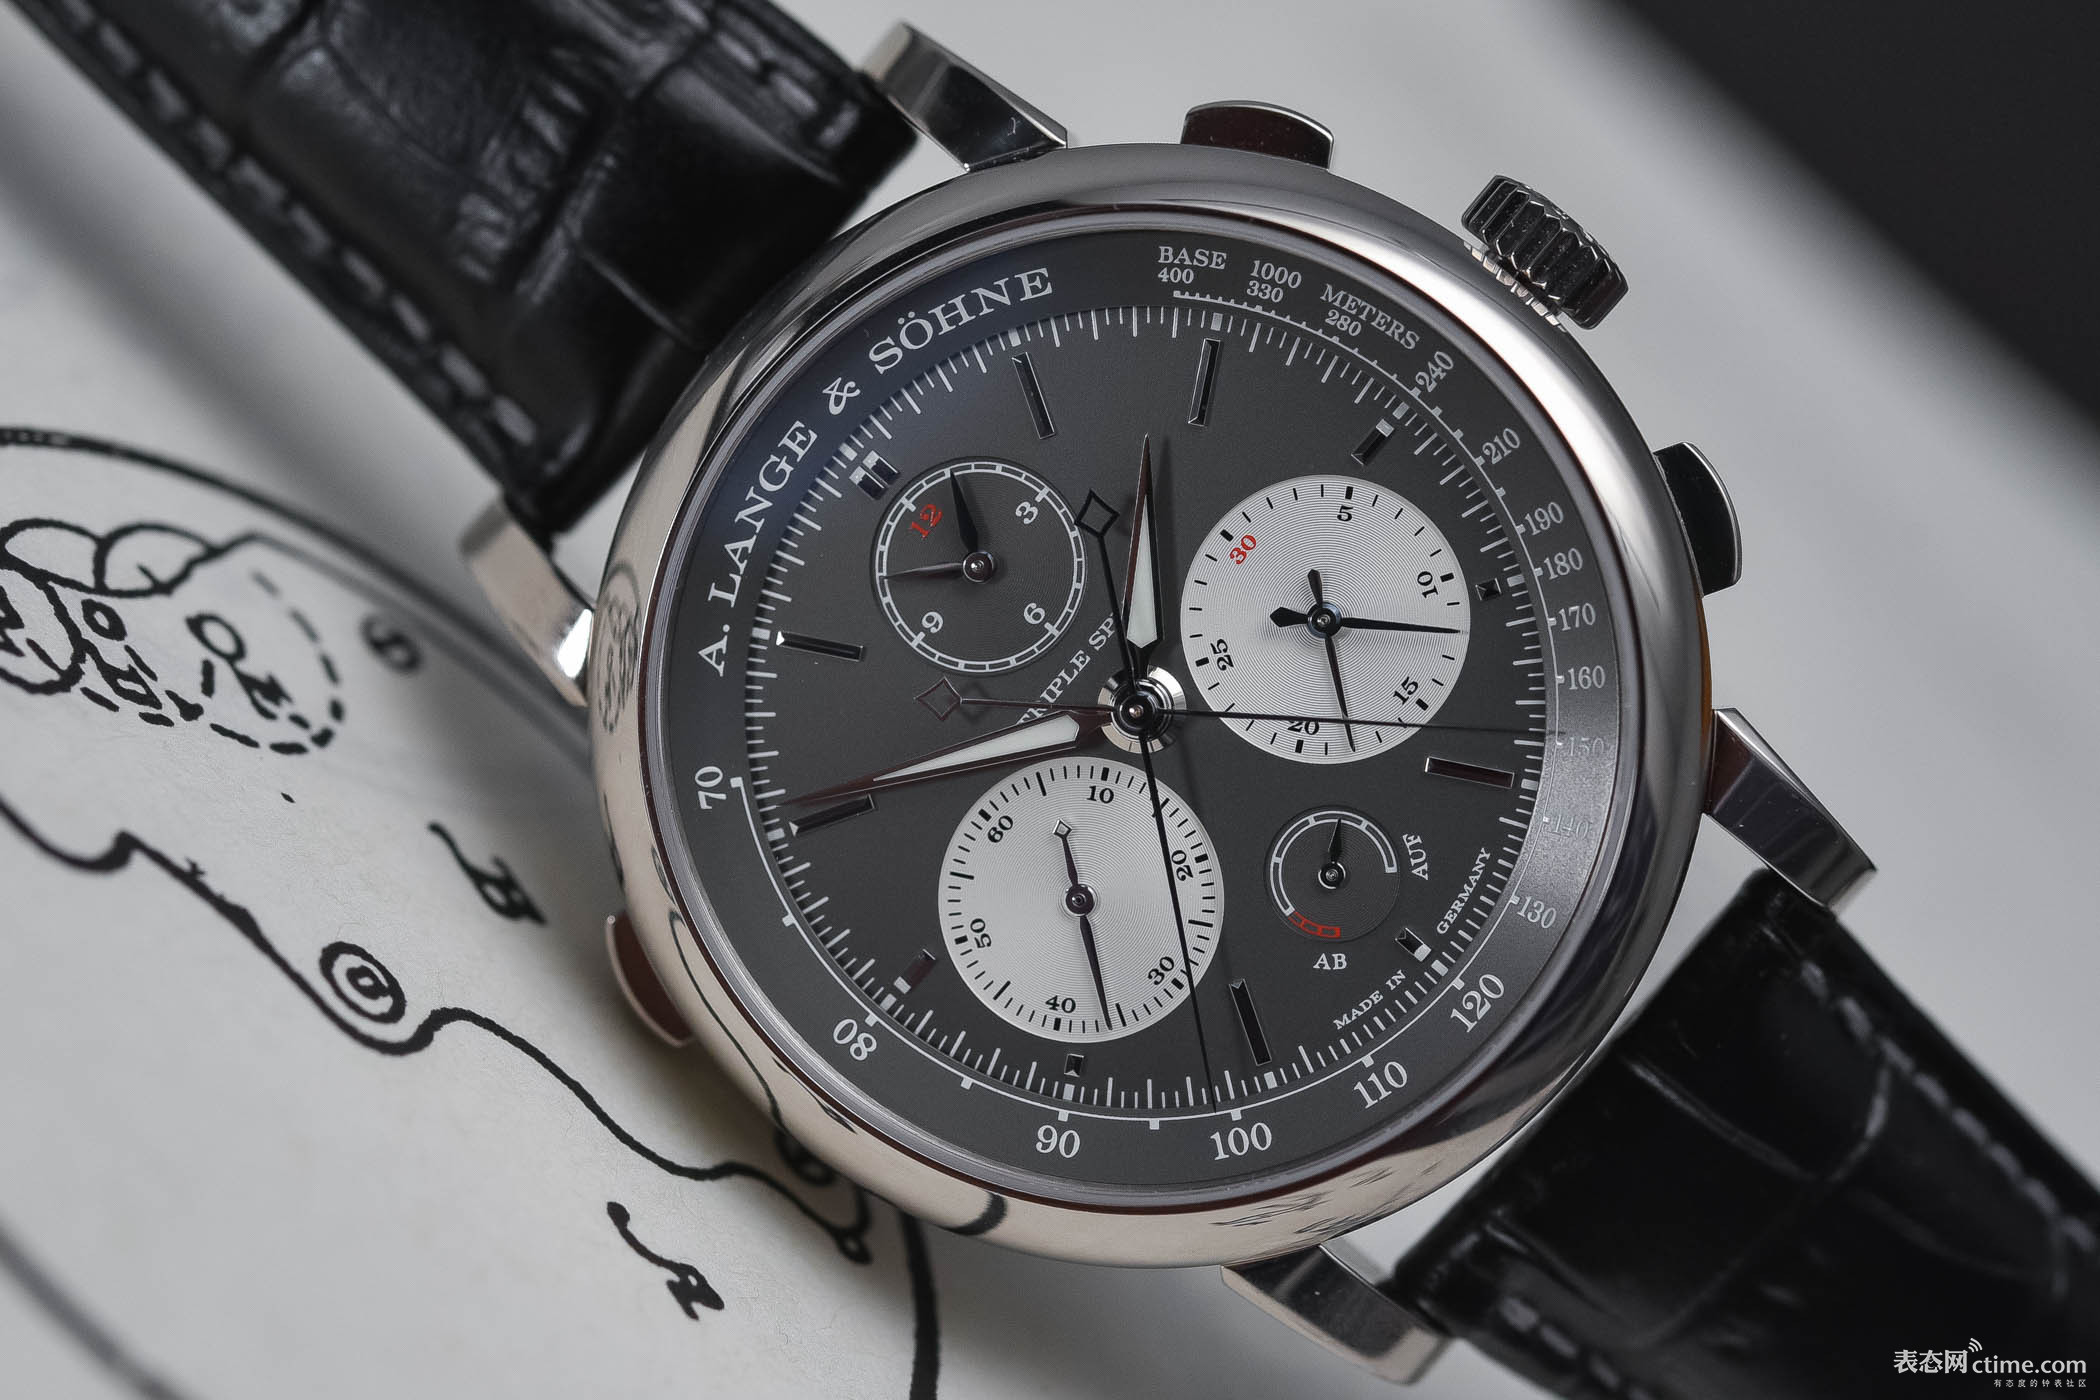 A.-Lange-and-Sohne-Triple-Split-SIHH-2018-Review-4.jpg